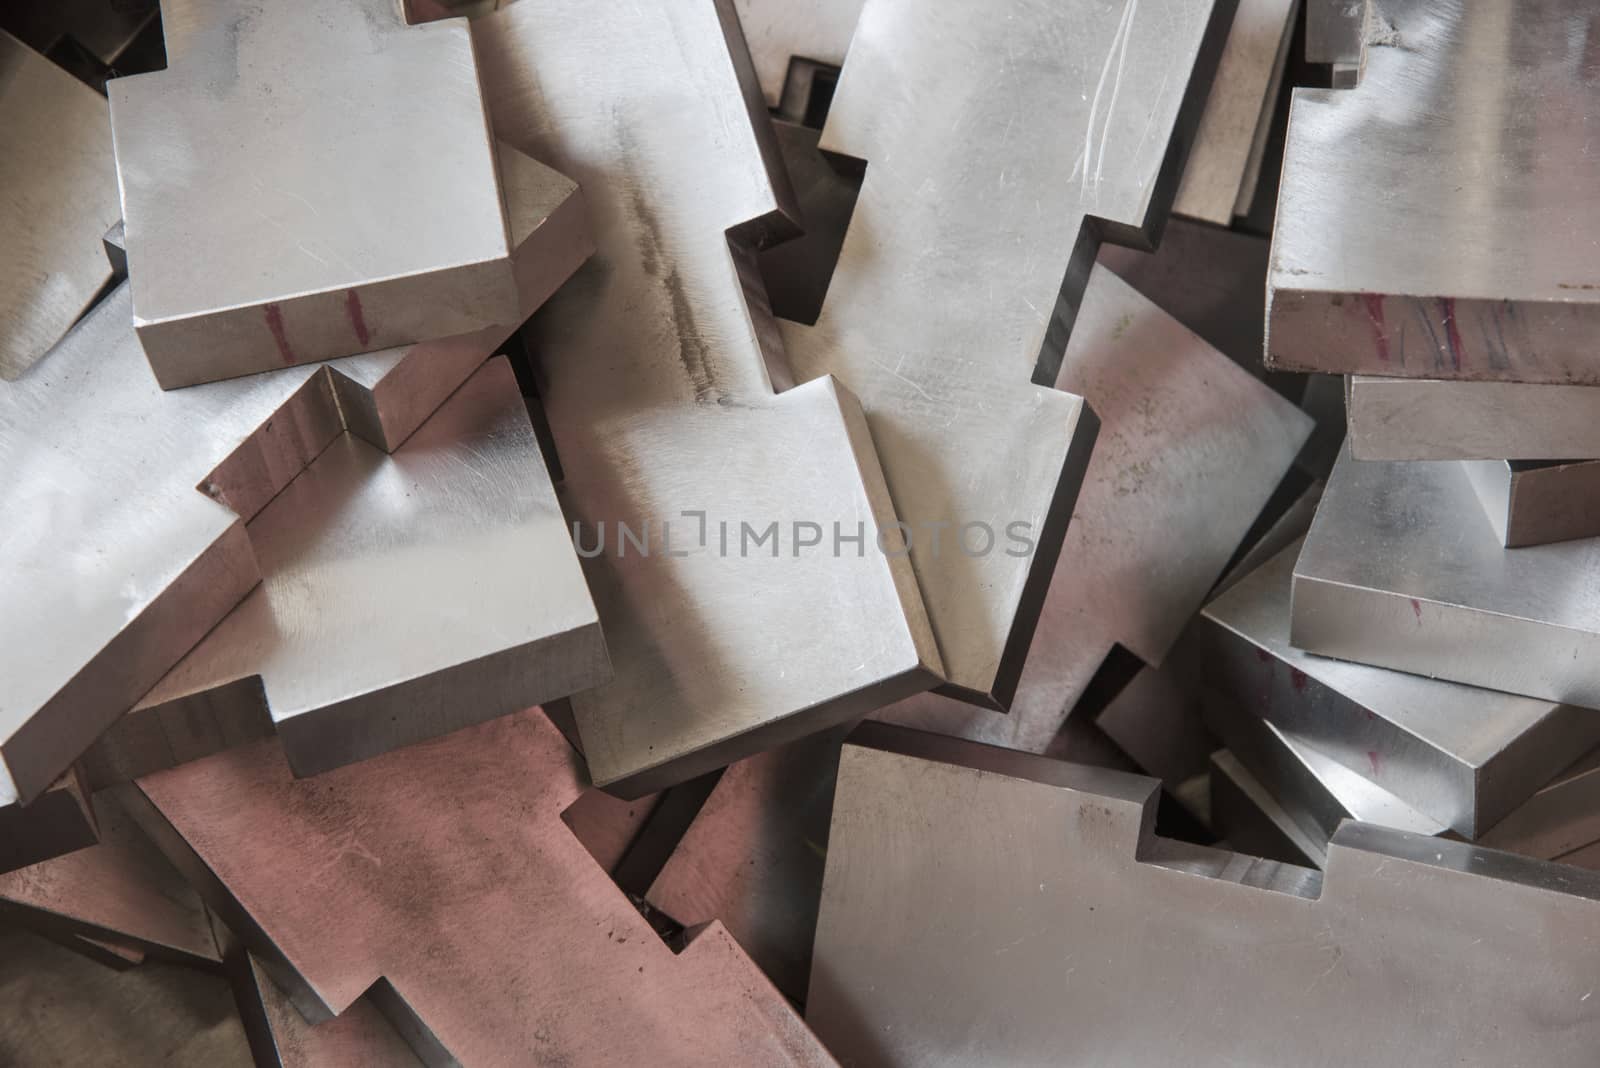 Pile of stainless steel blocks. Shallow depth of field with some of the blocks in focus.